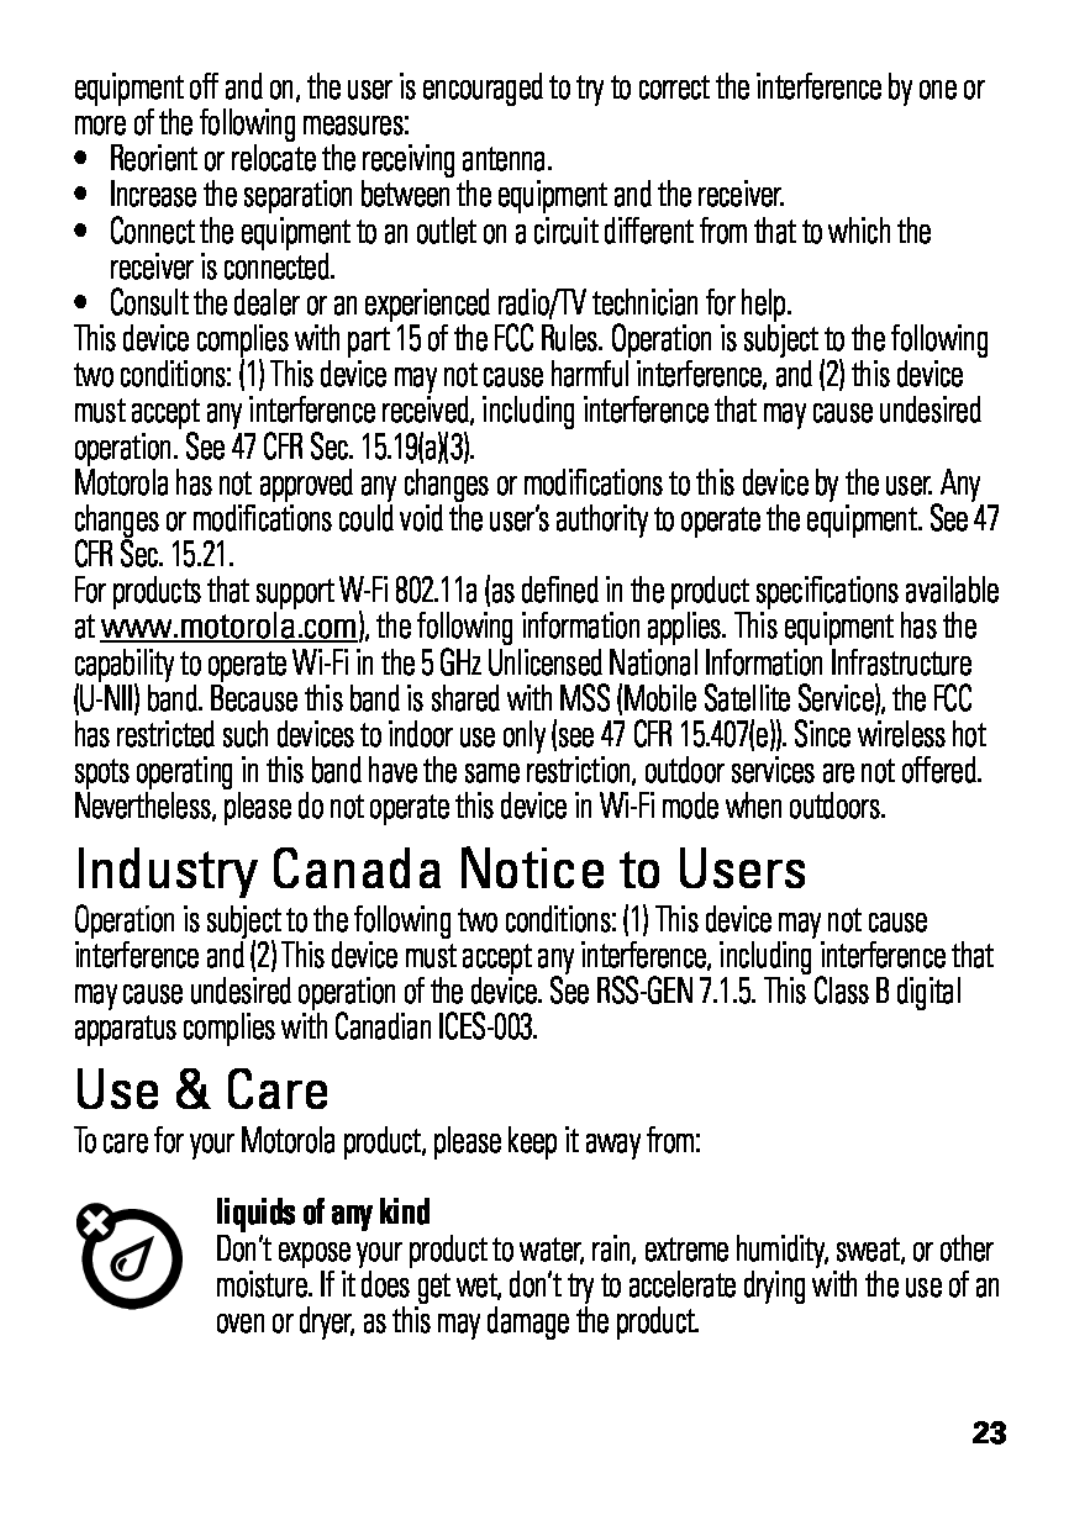 Motorola HX550 manual Industry Canada Notice to Users, Use & Care, •Reorient or relocate the receiving antenna 